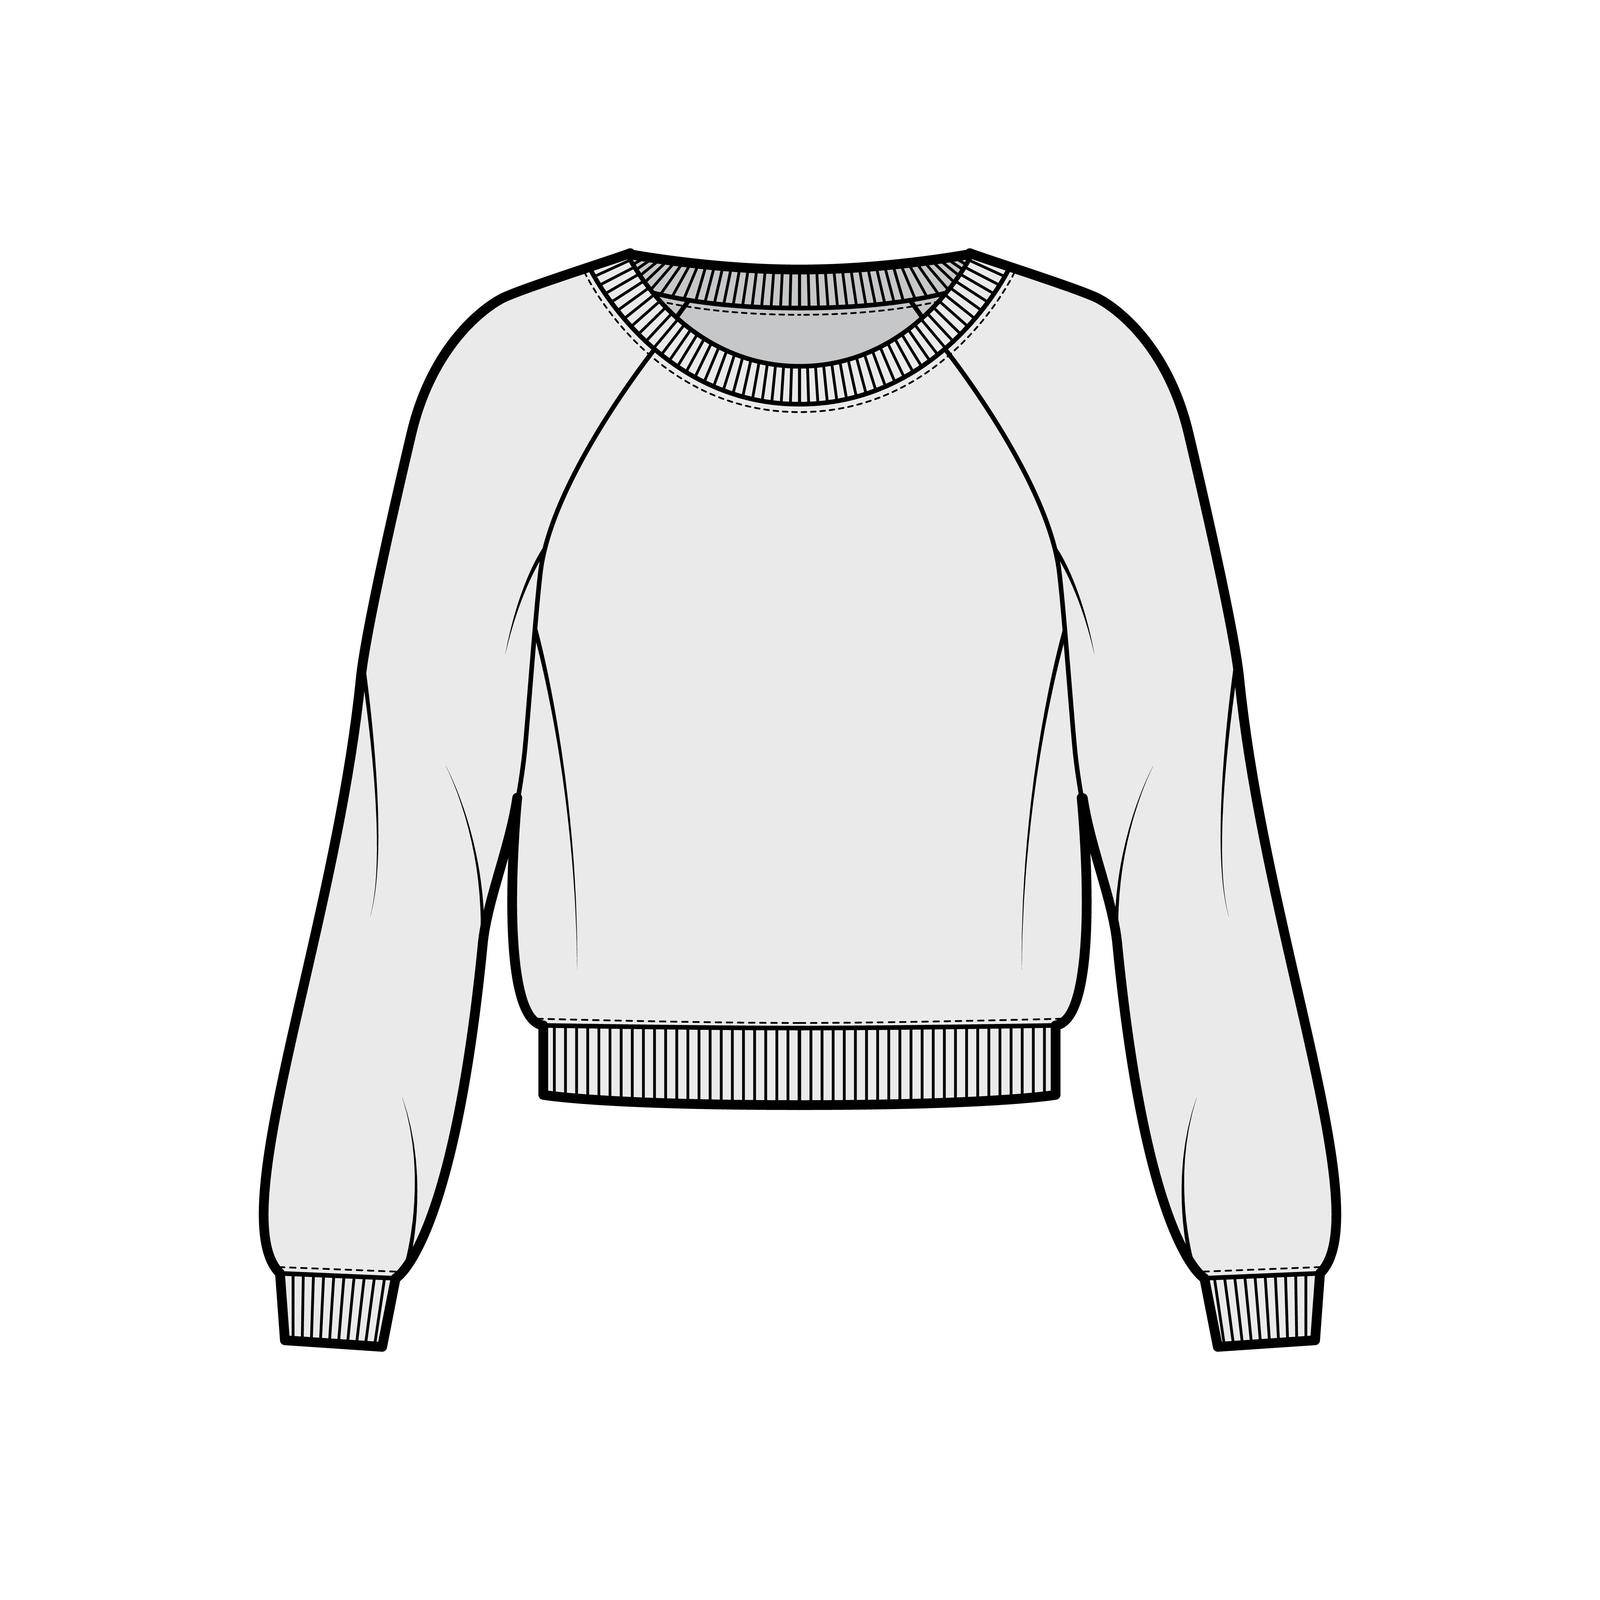 Cotton-terry sweatshirt technical fashion illustration with relaxed fit, scoop neckline, long raglan sleeves, ribbed trims. Flat outwear jumper apparel template front grey color. Women, men unisex top